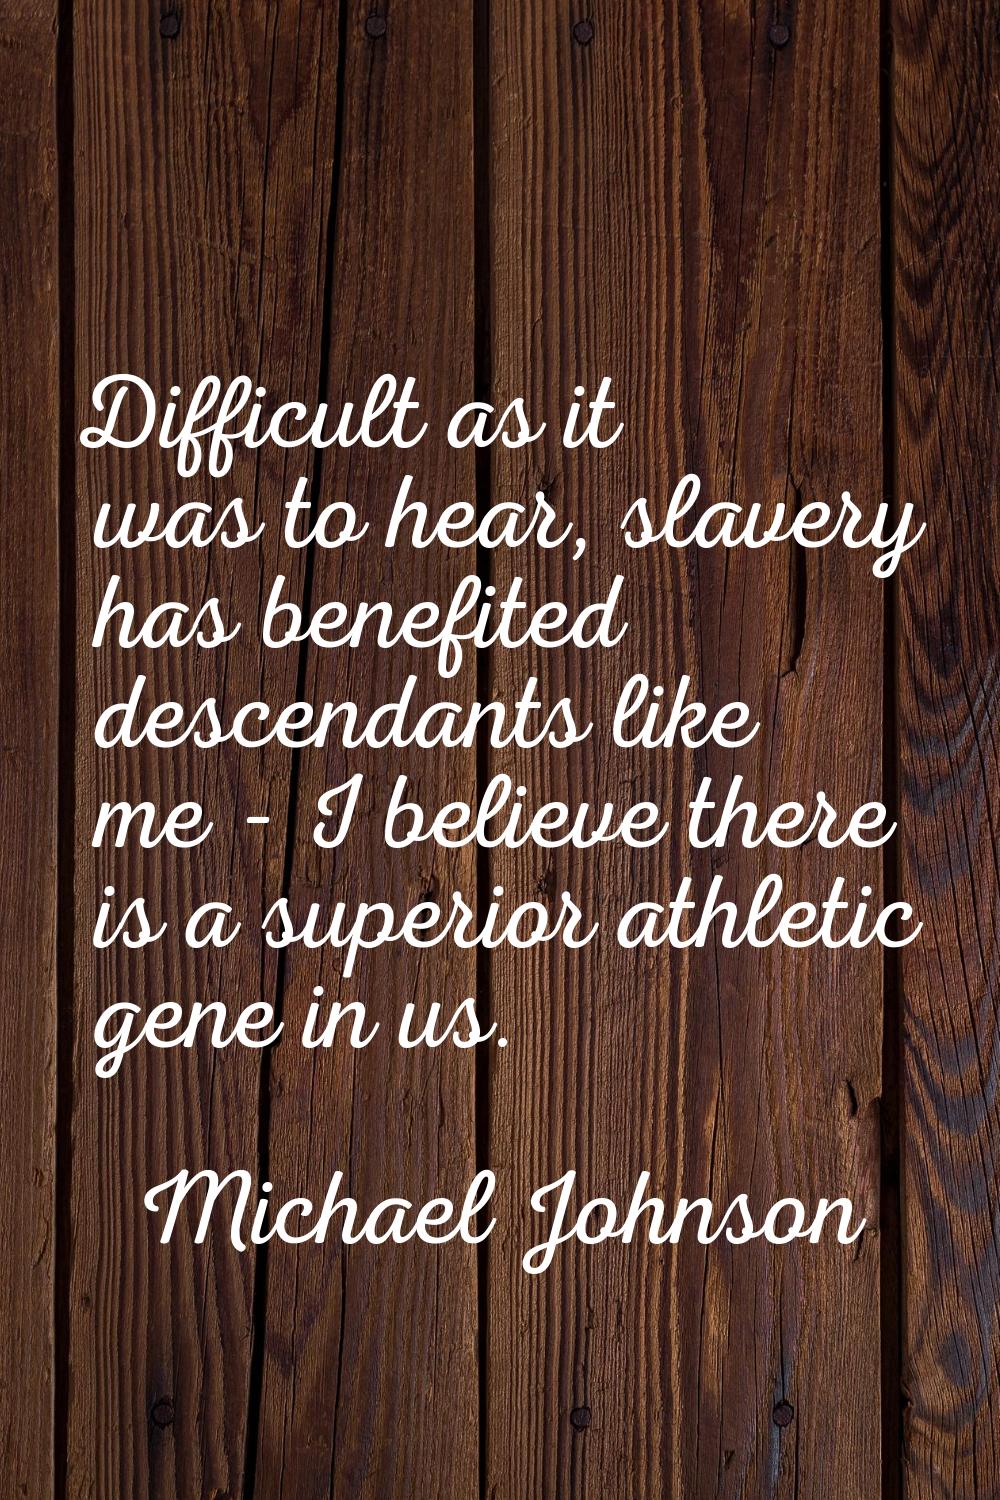 Difficult as it was to hear, slavery has benefited descendants like me - I believe there is a super